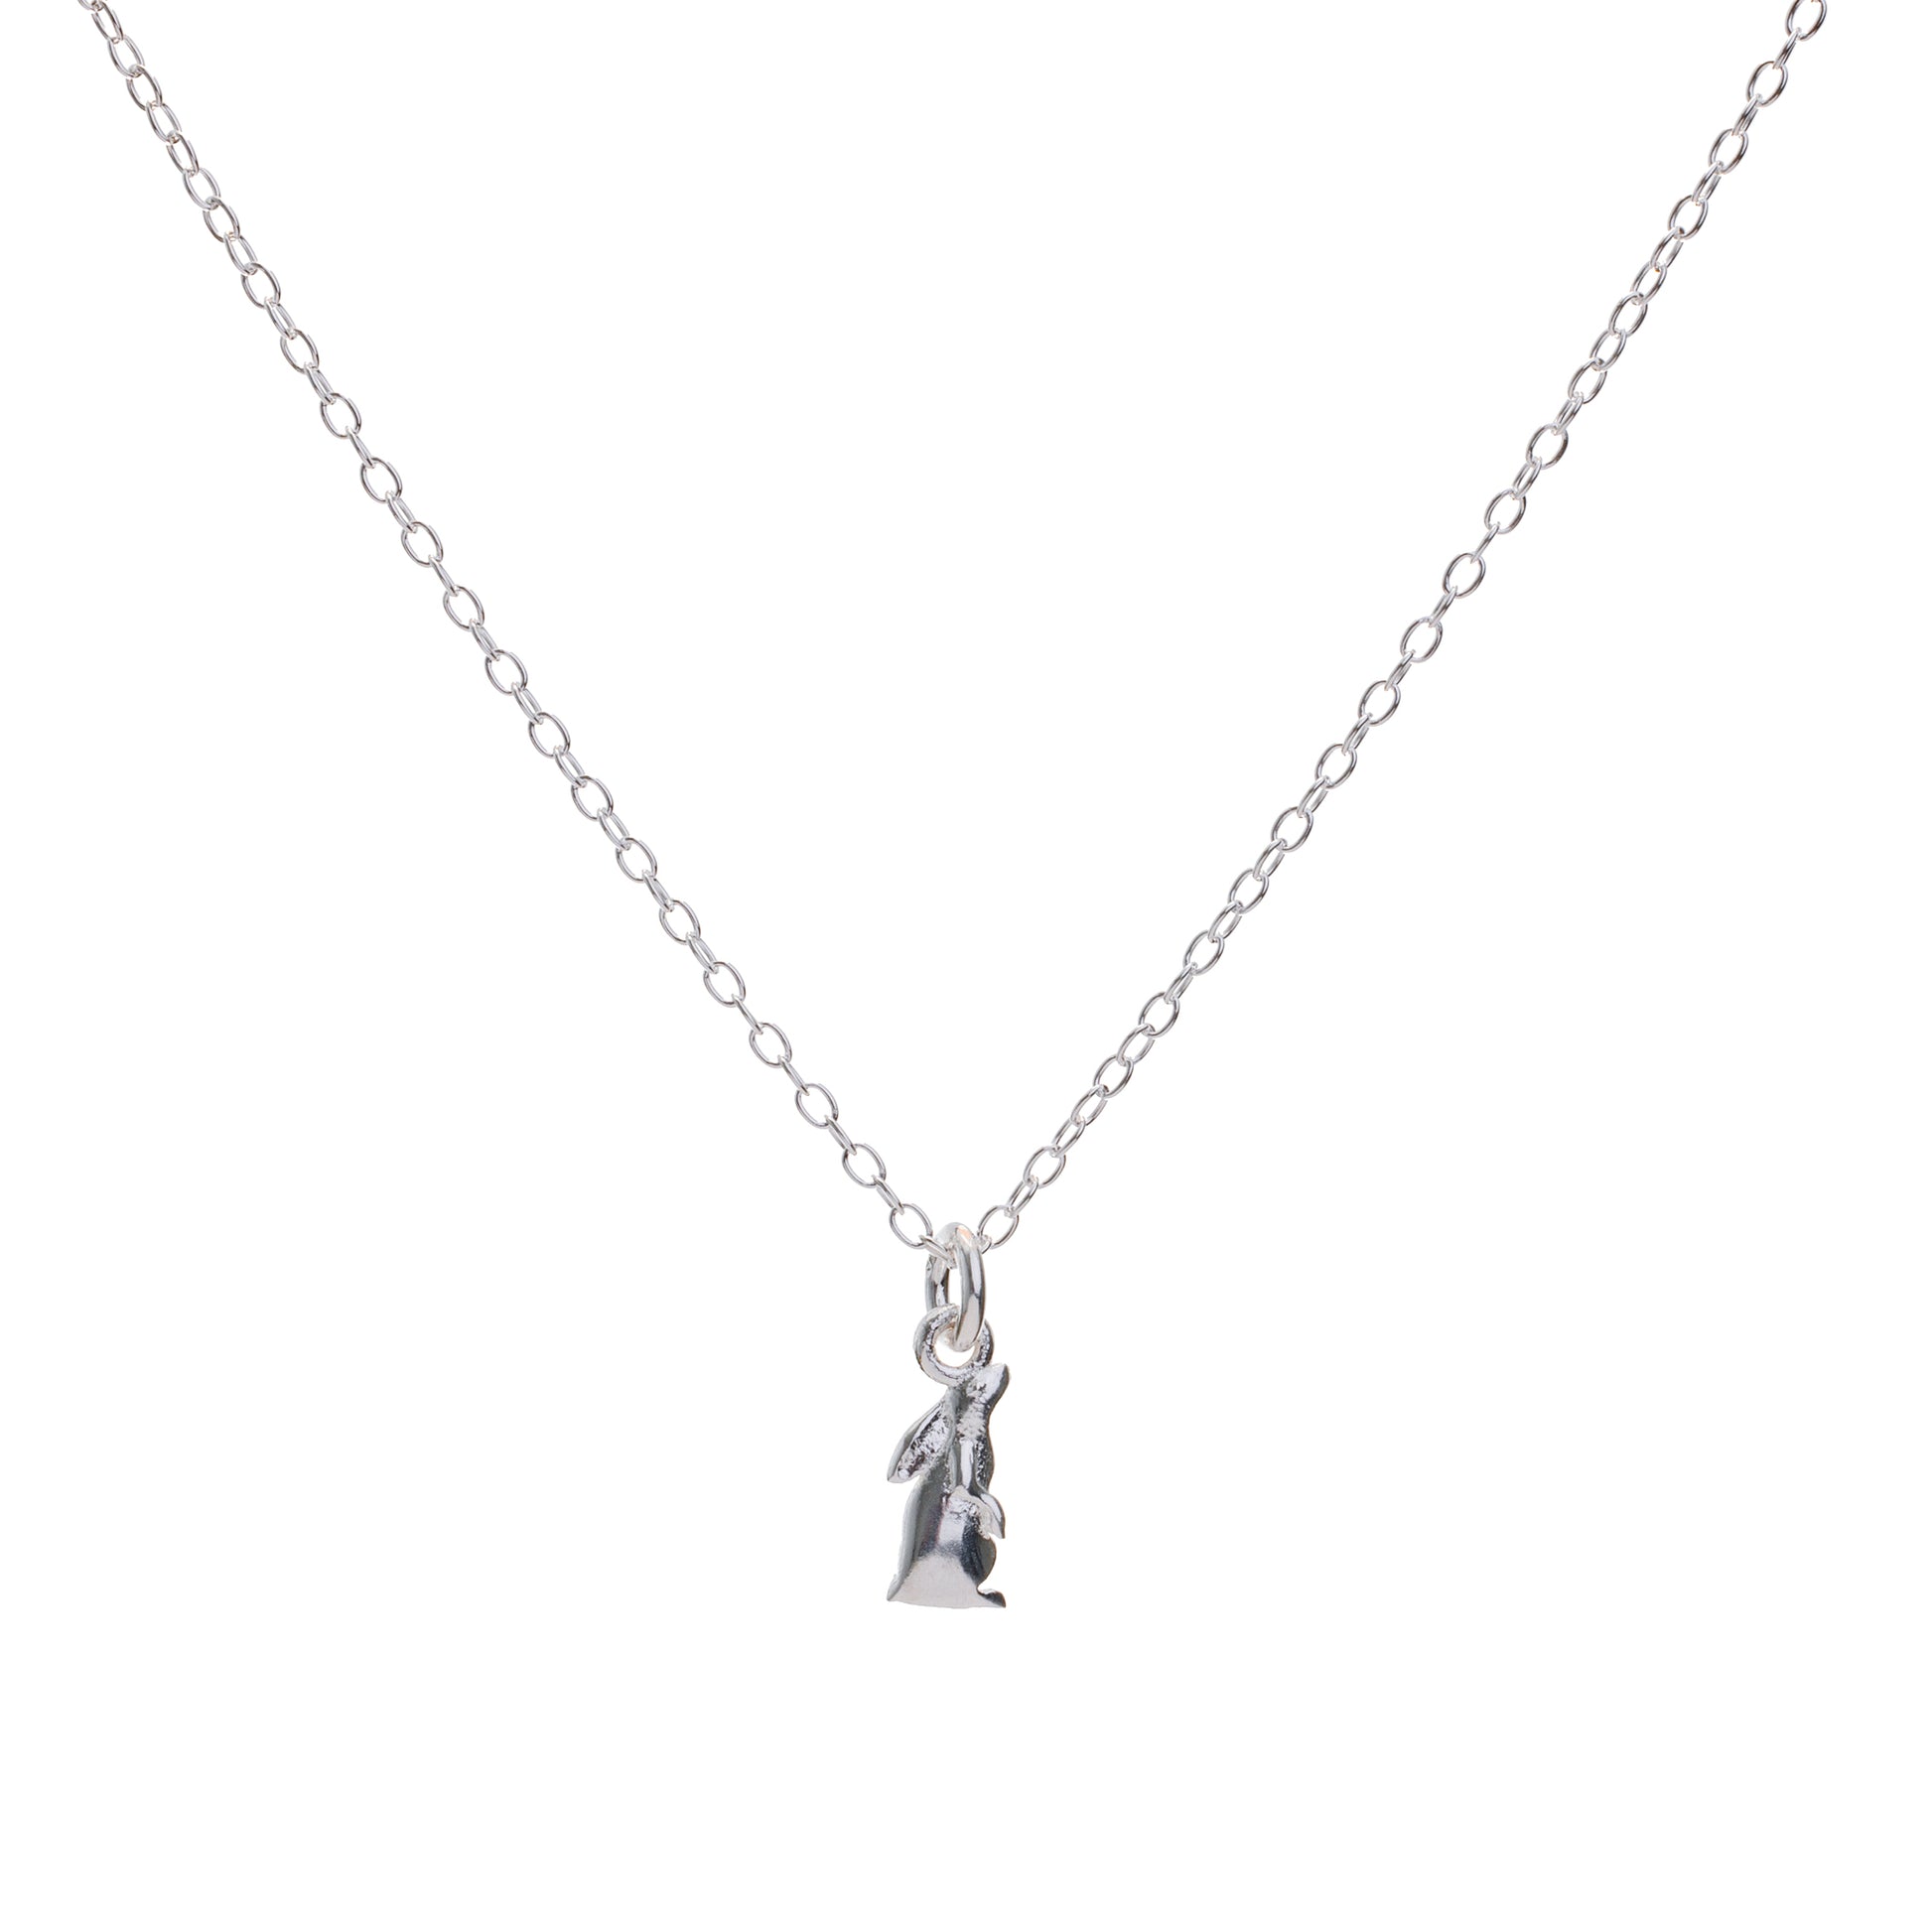 Silver Moon-Gazing Hare Charm Necklace